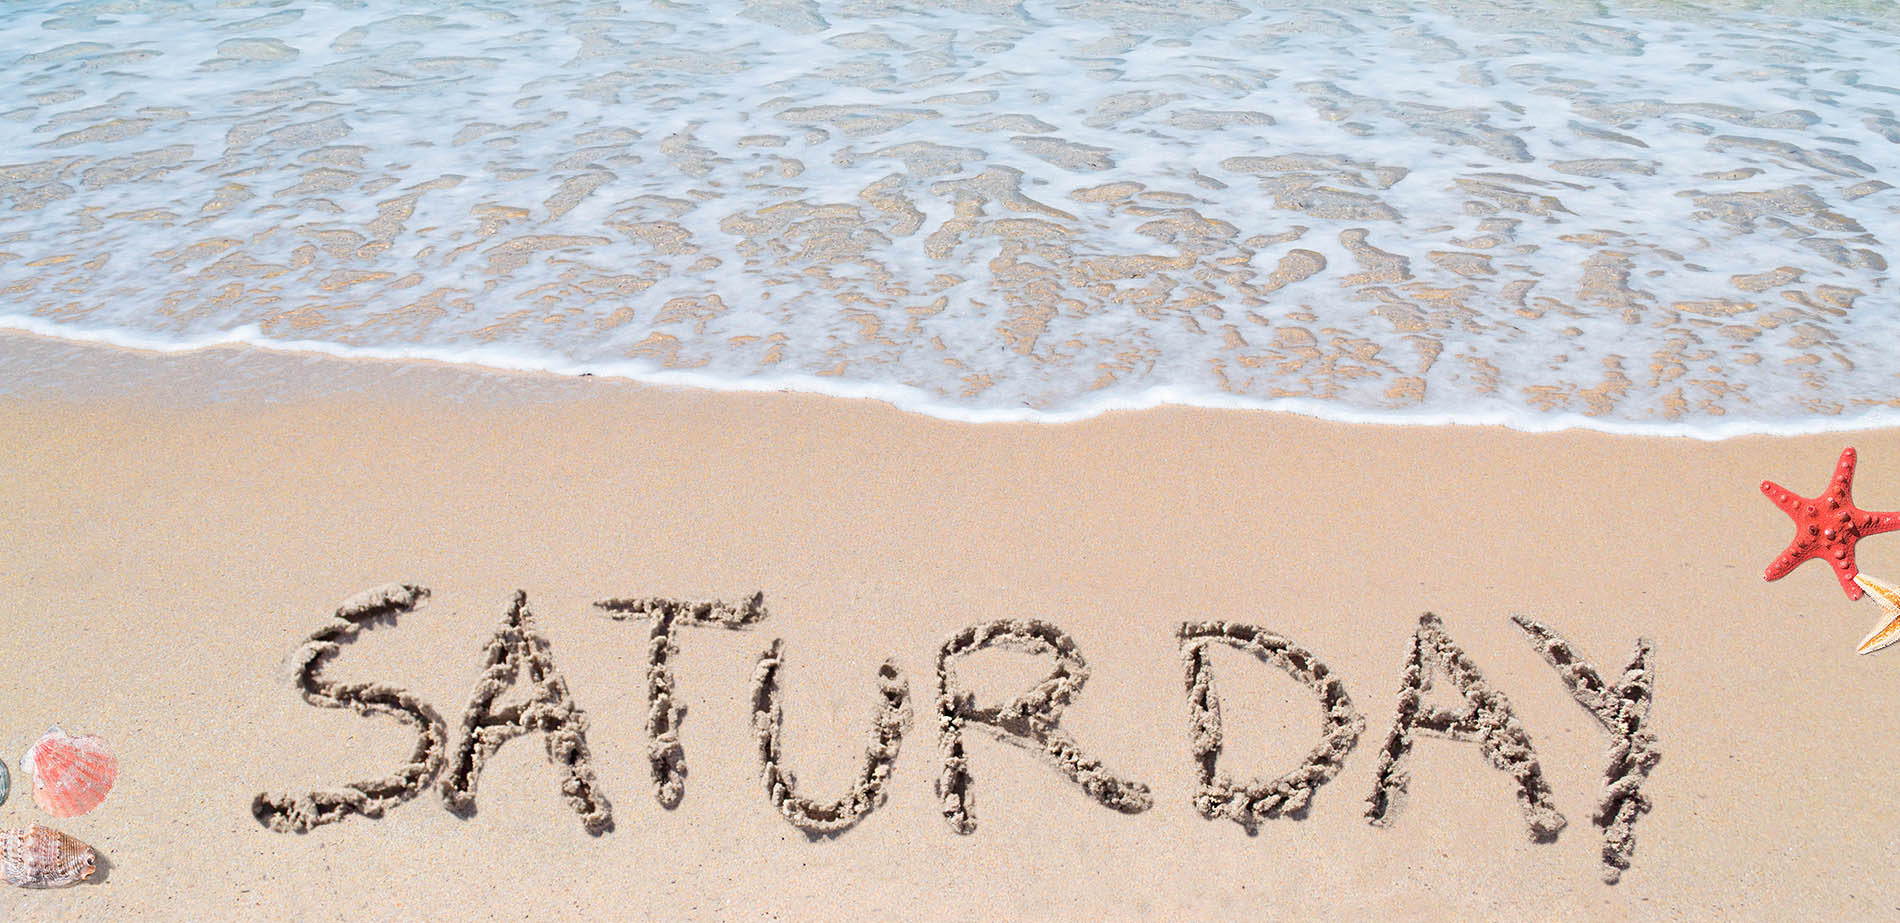 A beach scene with SATURDAY written in the sand